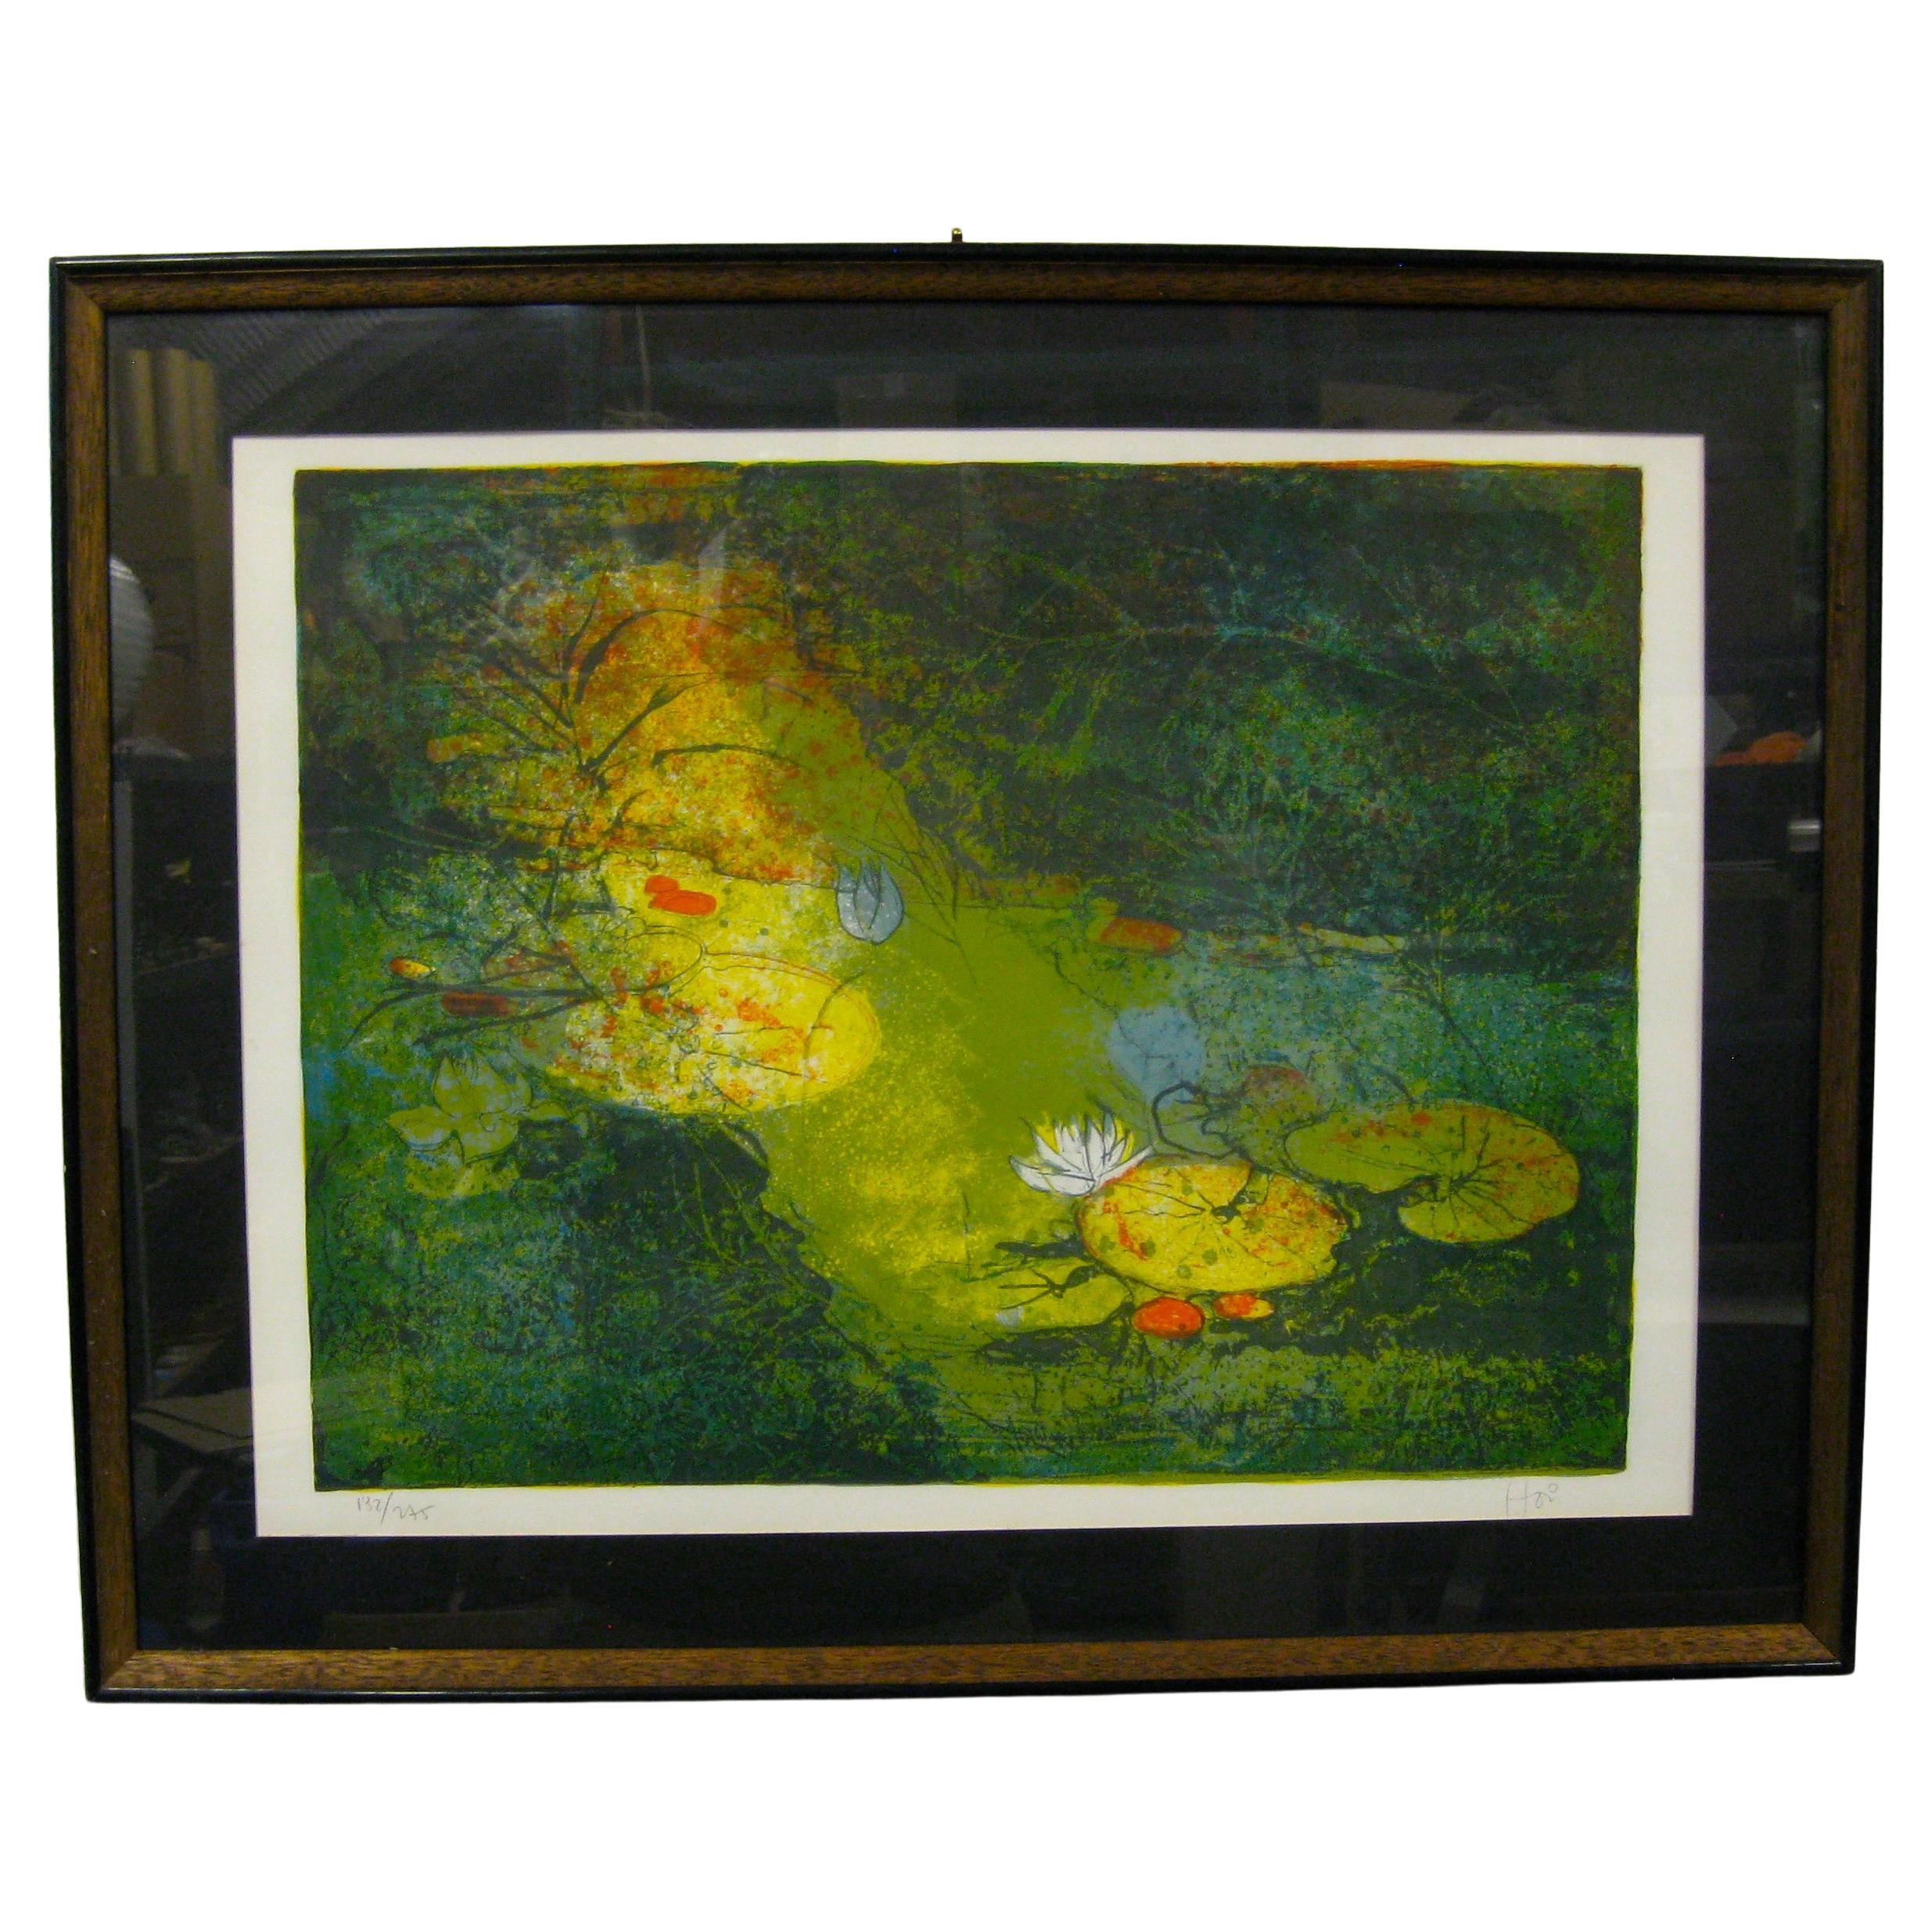 1970's, Hoi Lebadang Abstract Lithograph Print "Water Lilies" Signed & Numbered